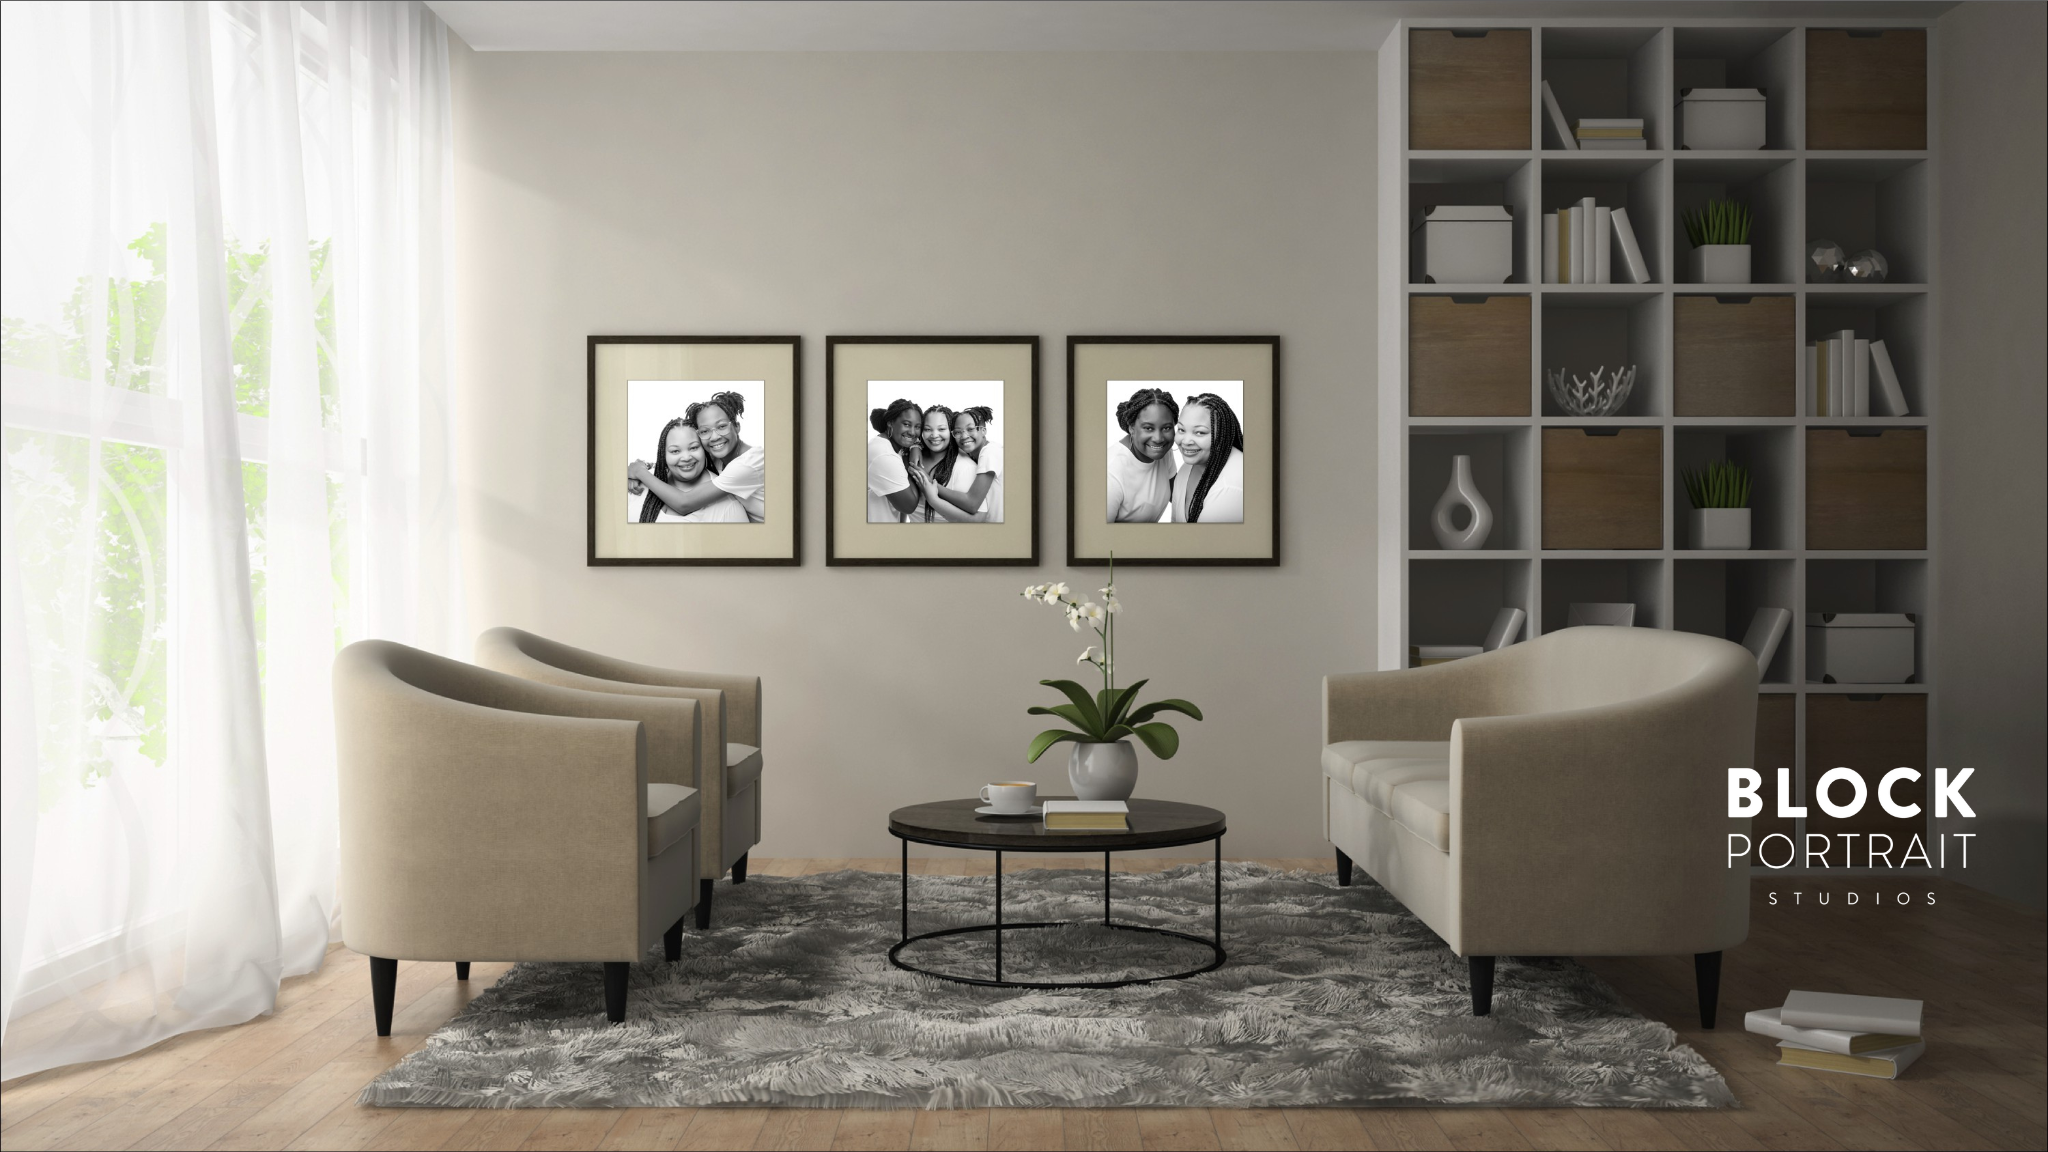 Image of a sitting area in a home, with beige walls and decor, with black and white portraits of an African American family in a gallery wall design.